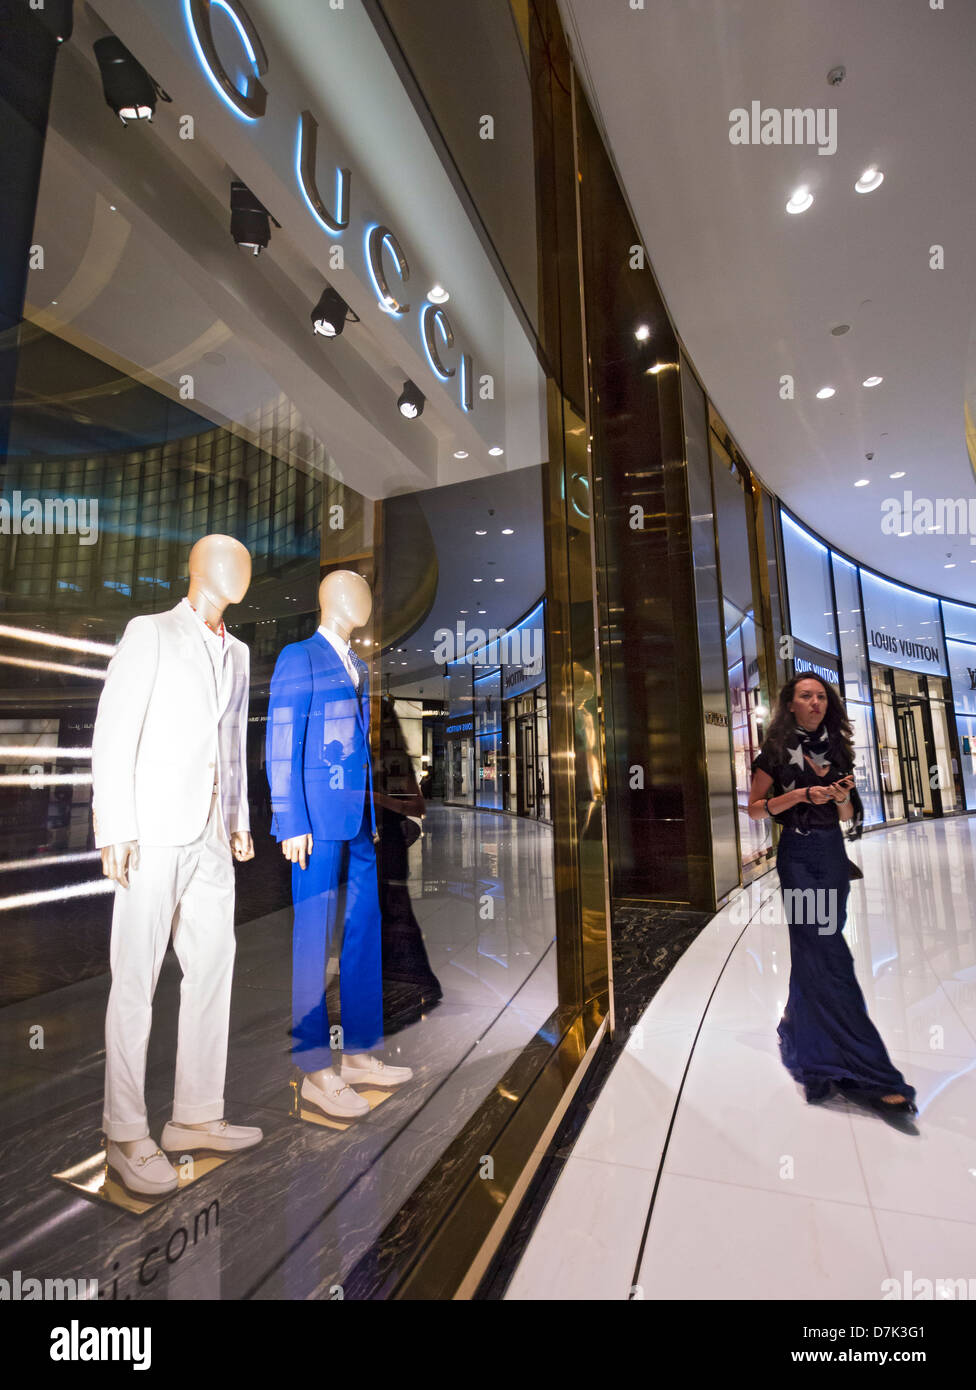 Louis vuitton boutique dubai mall hi-res stock photography and images -  Alamy